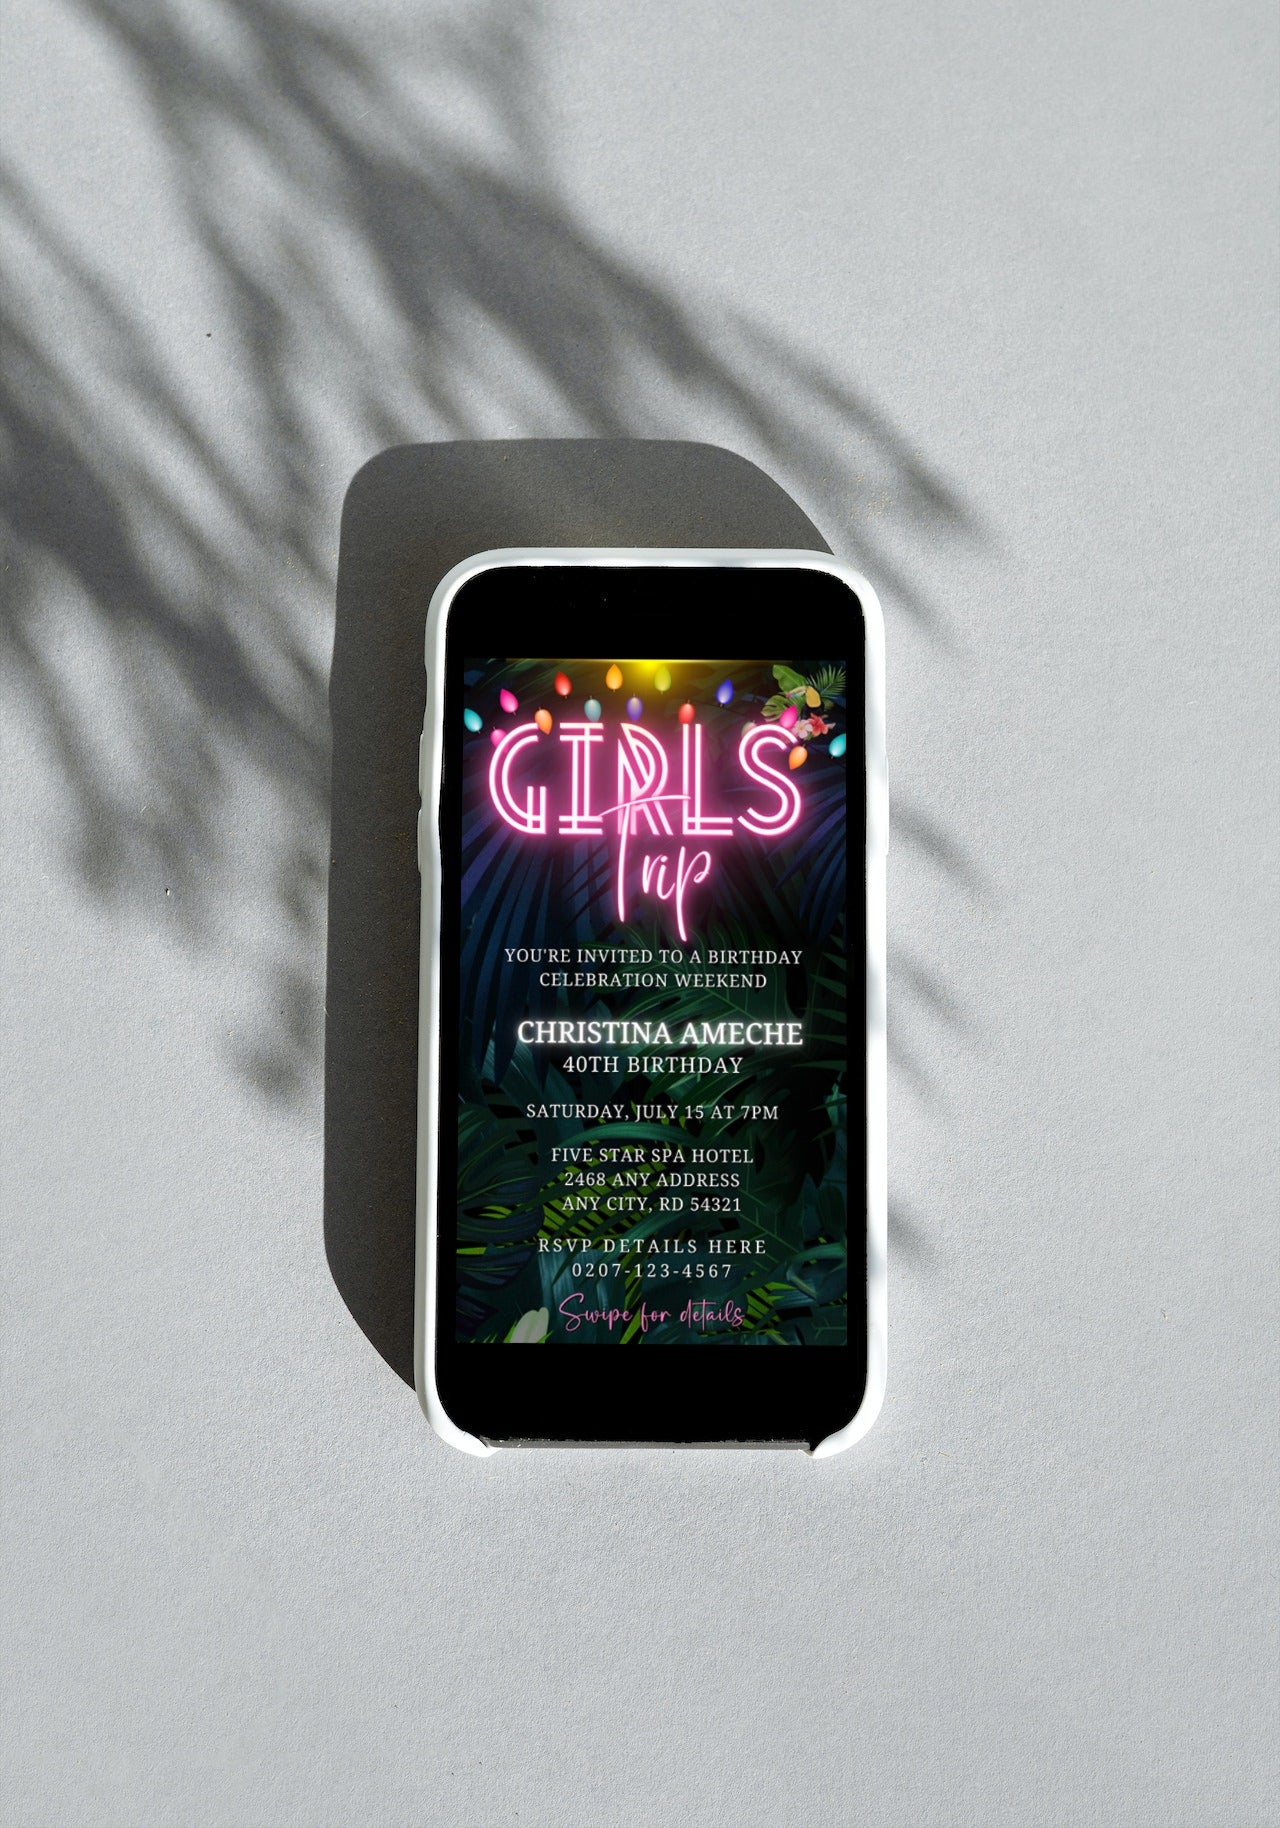 Digital invitation displayed on a smartphone, featuring a pink neon sign for a Tropical Destination Neon Pink | Girl's Trip Evite.